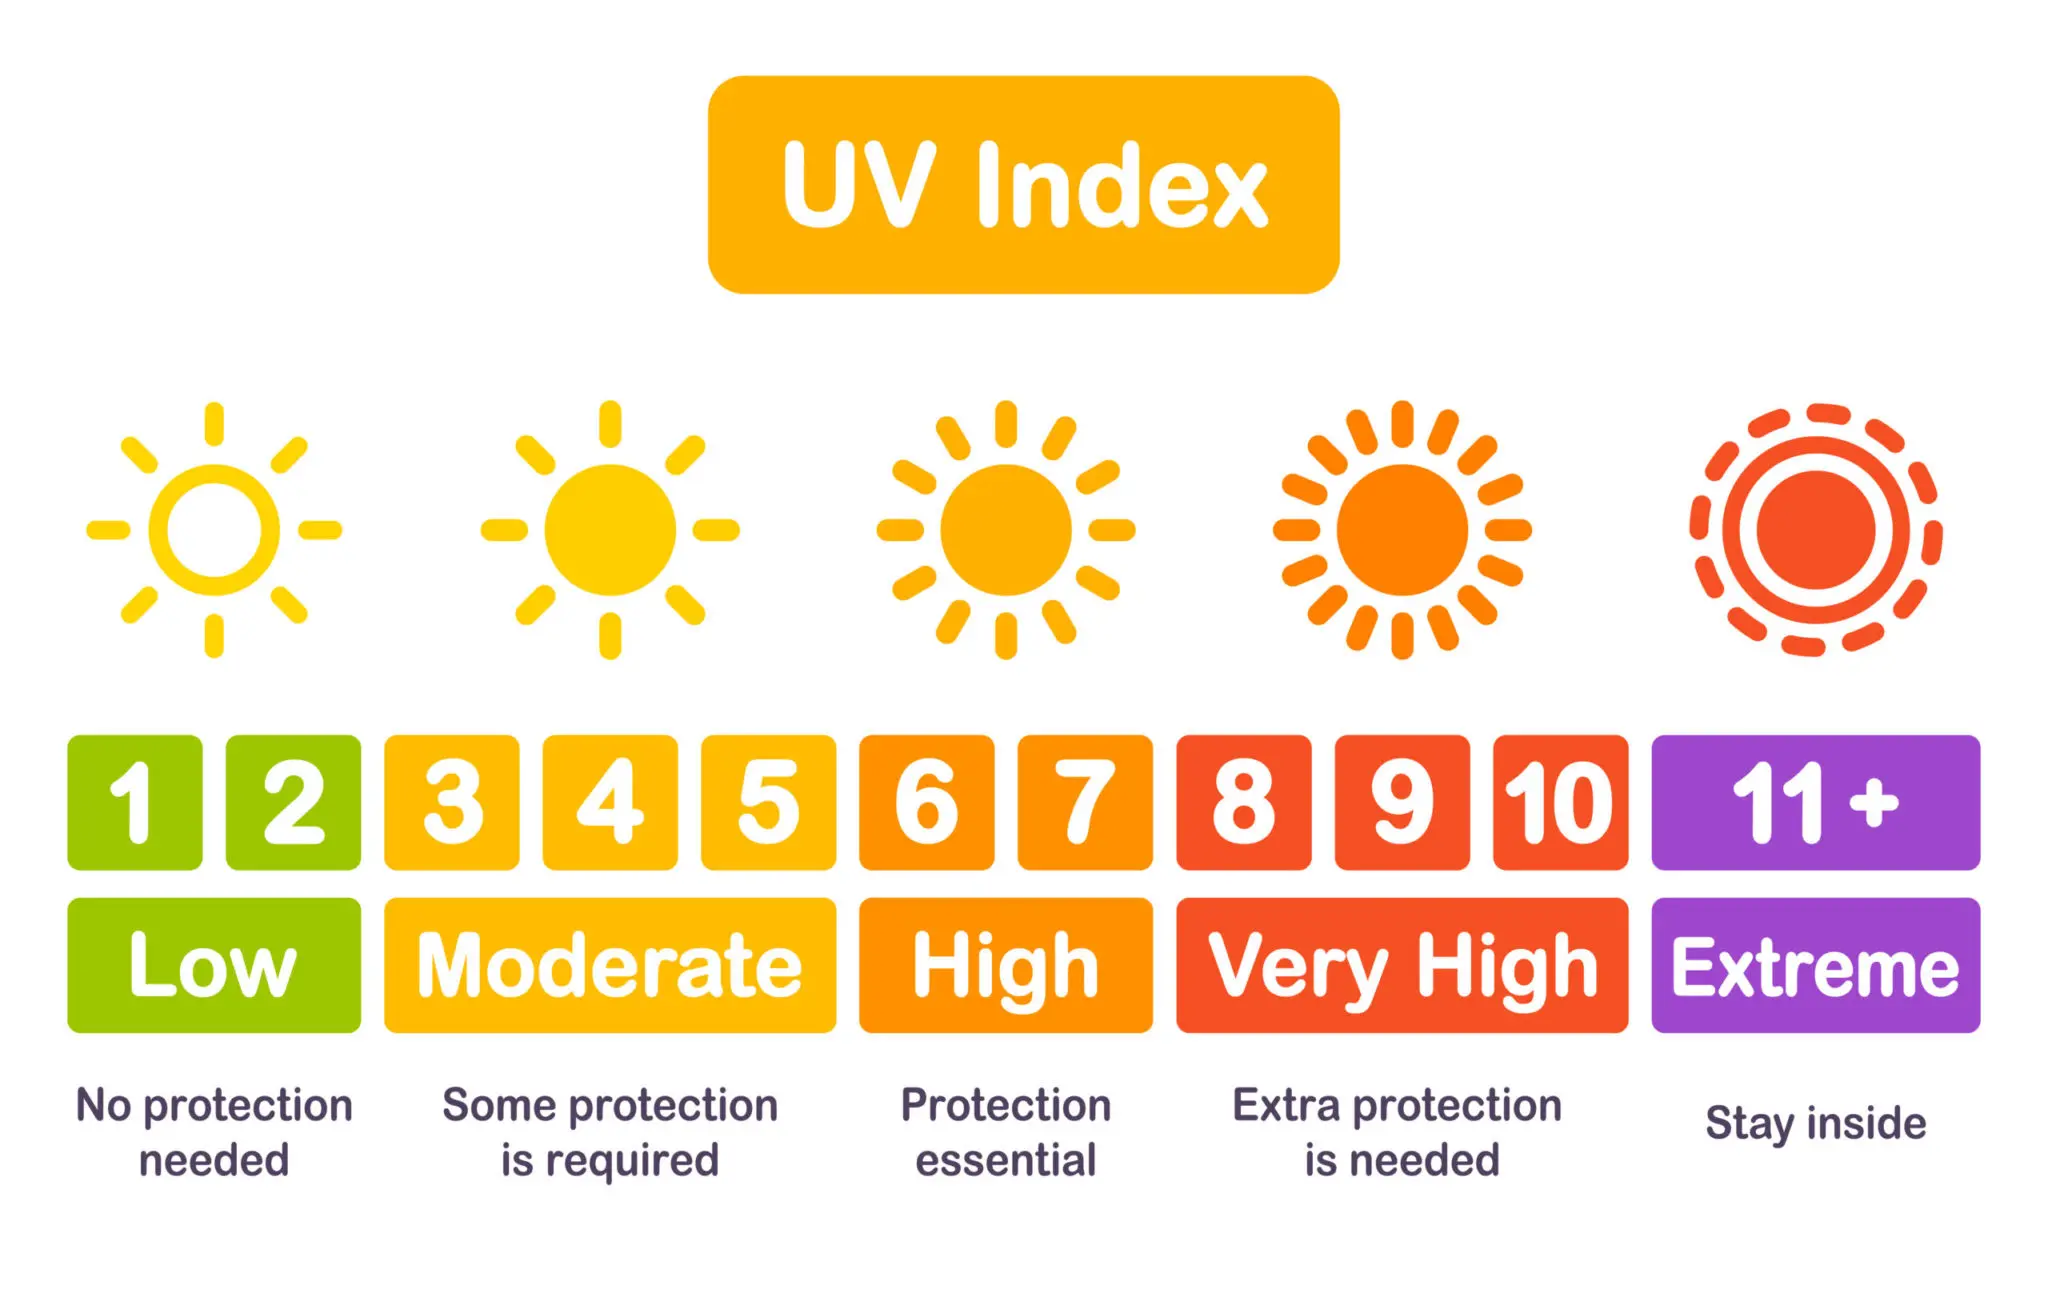 Whats a Good Uv for Tanning?